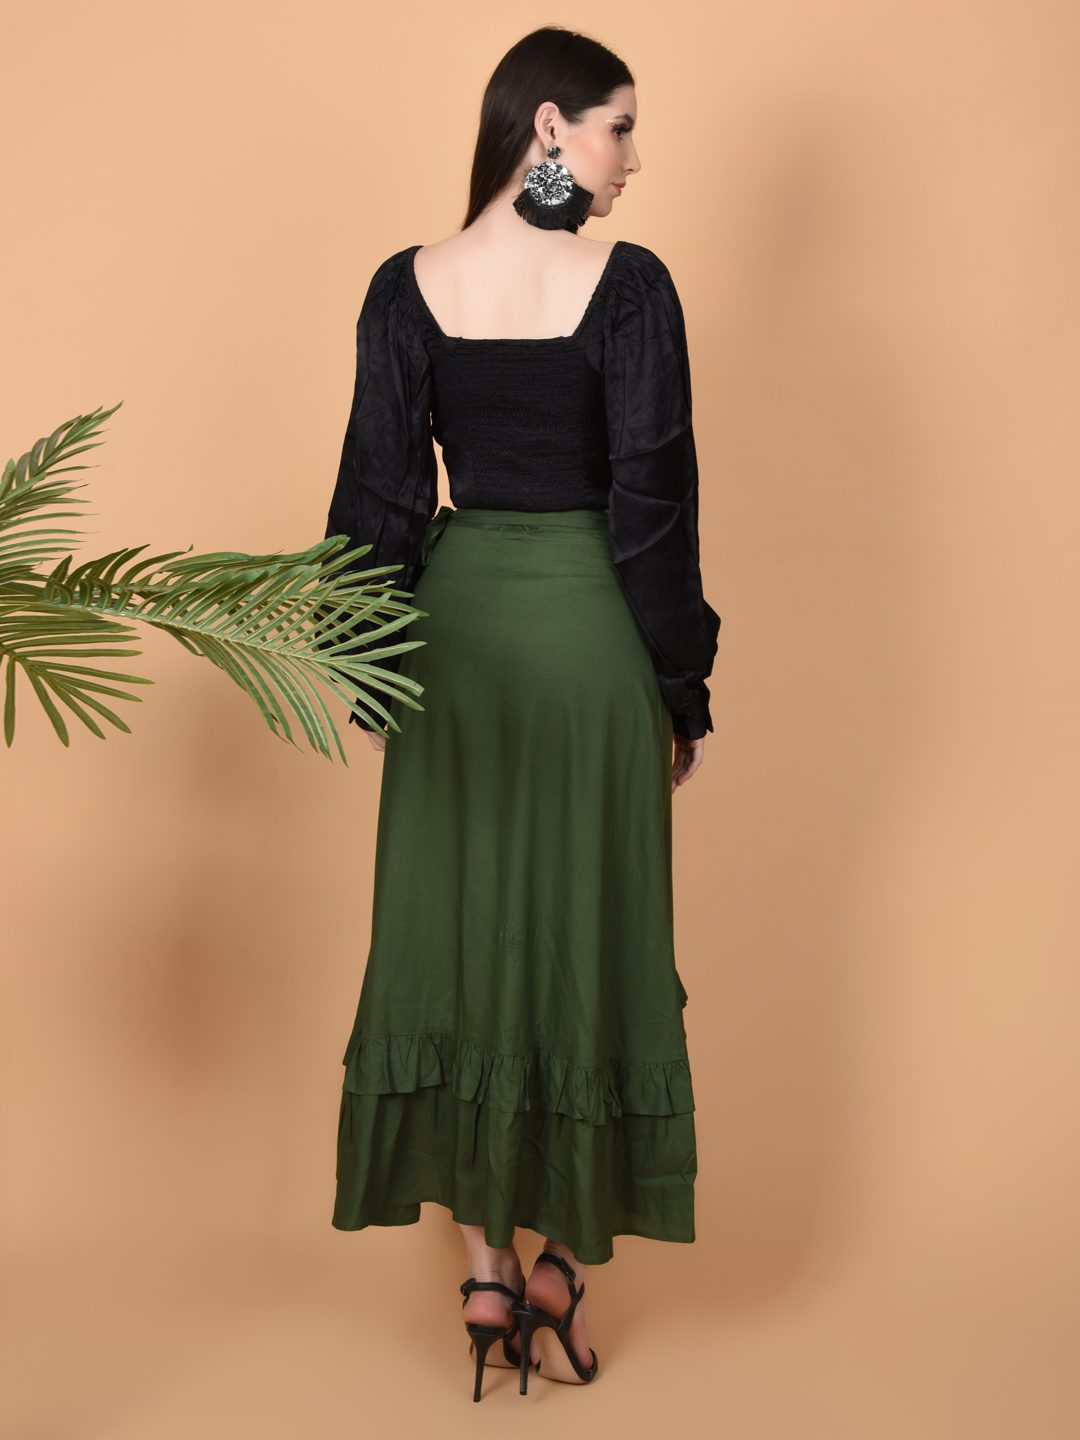 Flawless Women's Olive Wrap Around Tie Knot Skirt - Stylish and Versatile Fashion Being Flawless